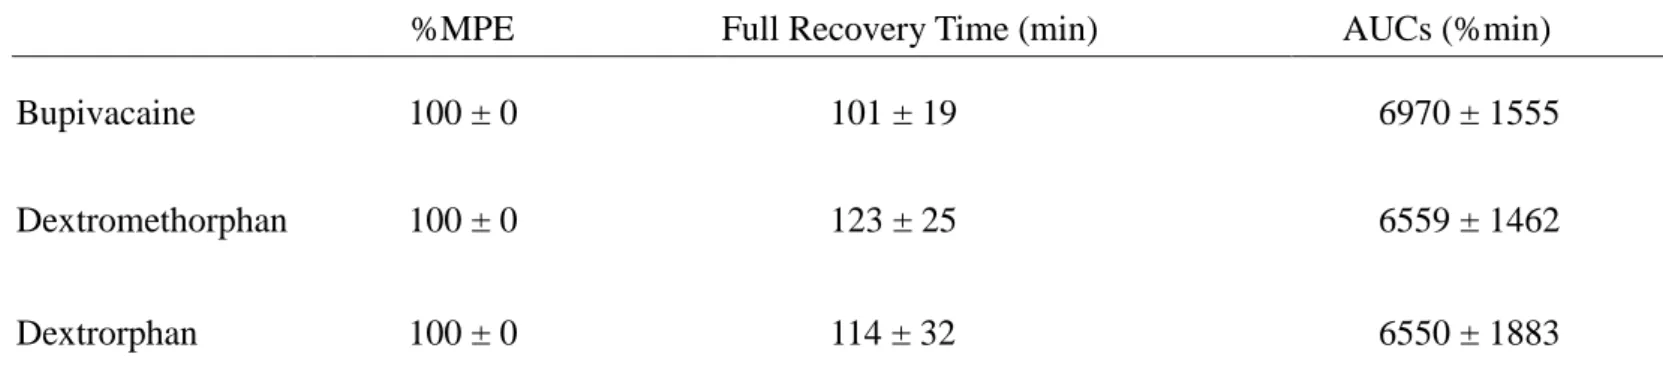 Table 2. The %MPE, full recovery time, and AUCs of bupivacaine at 8 μmol · kg -1 , dextromethorphan at 20 μmol ·  kg -1 , and dextrorphan at 40 μmol · kg -1